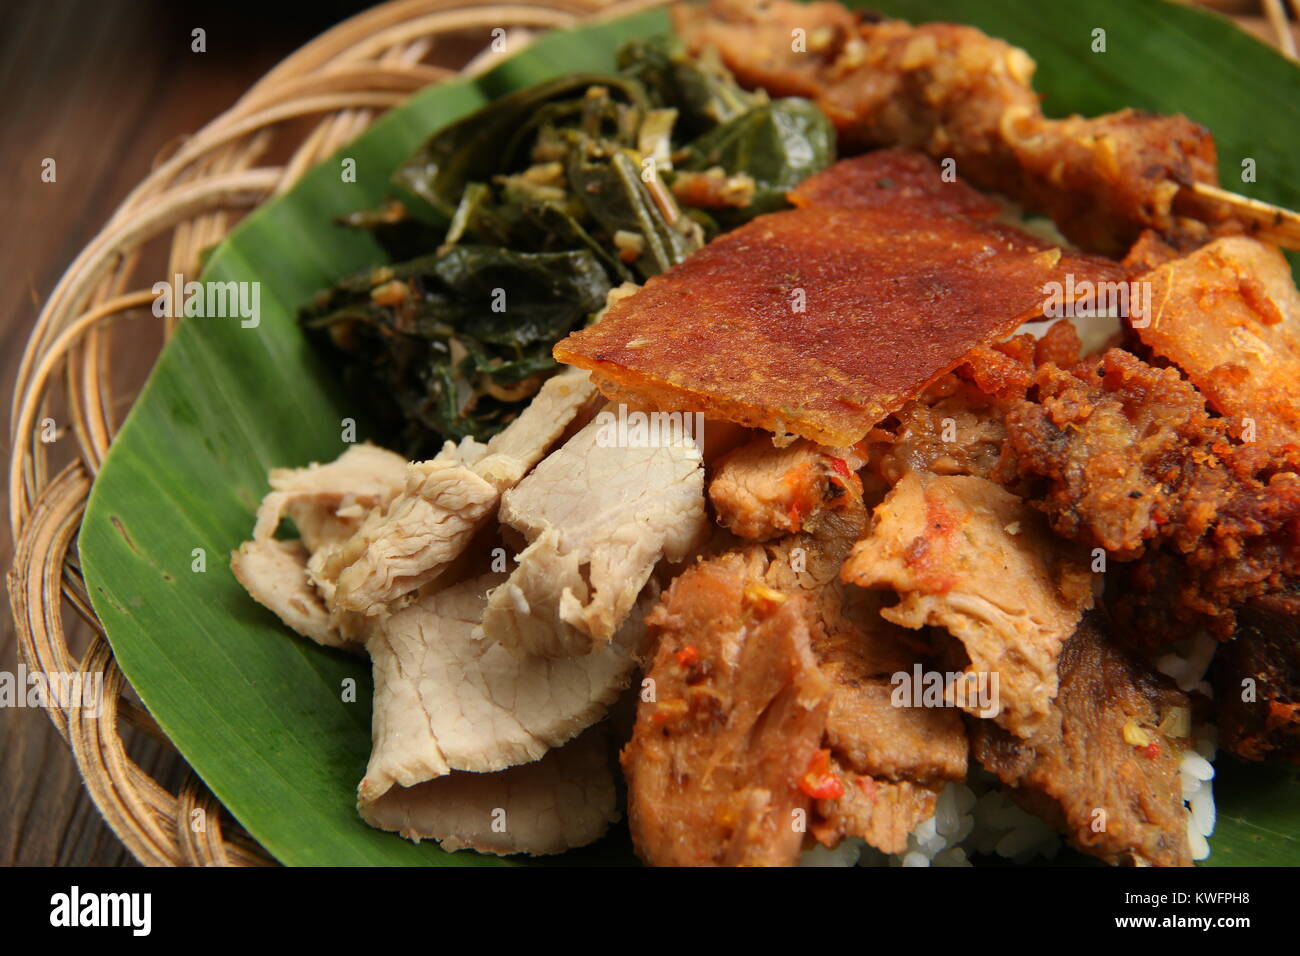 Nasi Campur Babi Guling. Balinese rice dish of steamed rice topped with  variety of roast pork dishes Stock Photo - Alamy